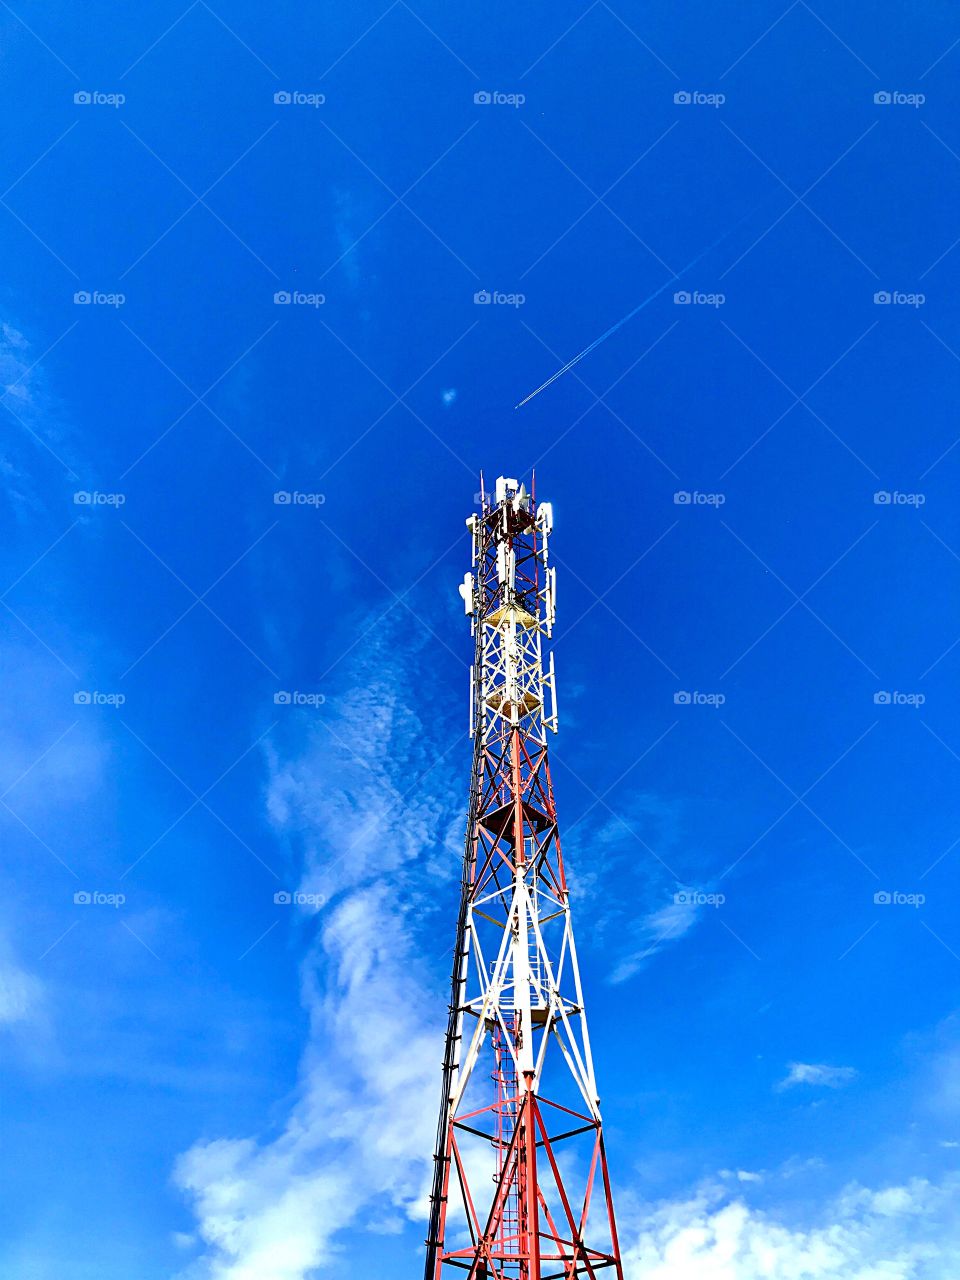 Tower with communication antennas against the blue sky with clouds